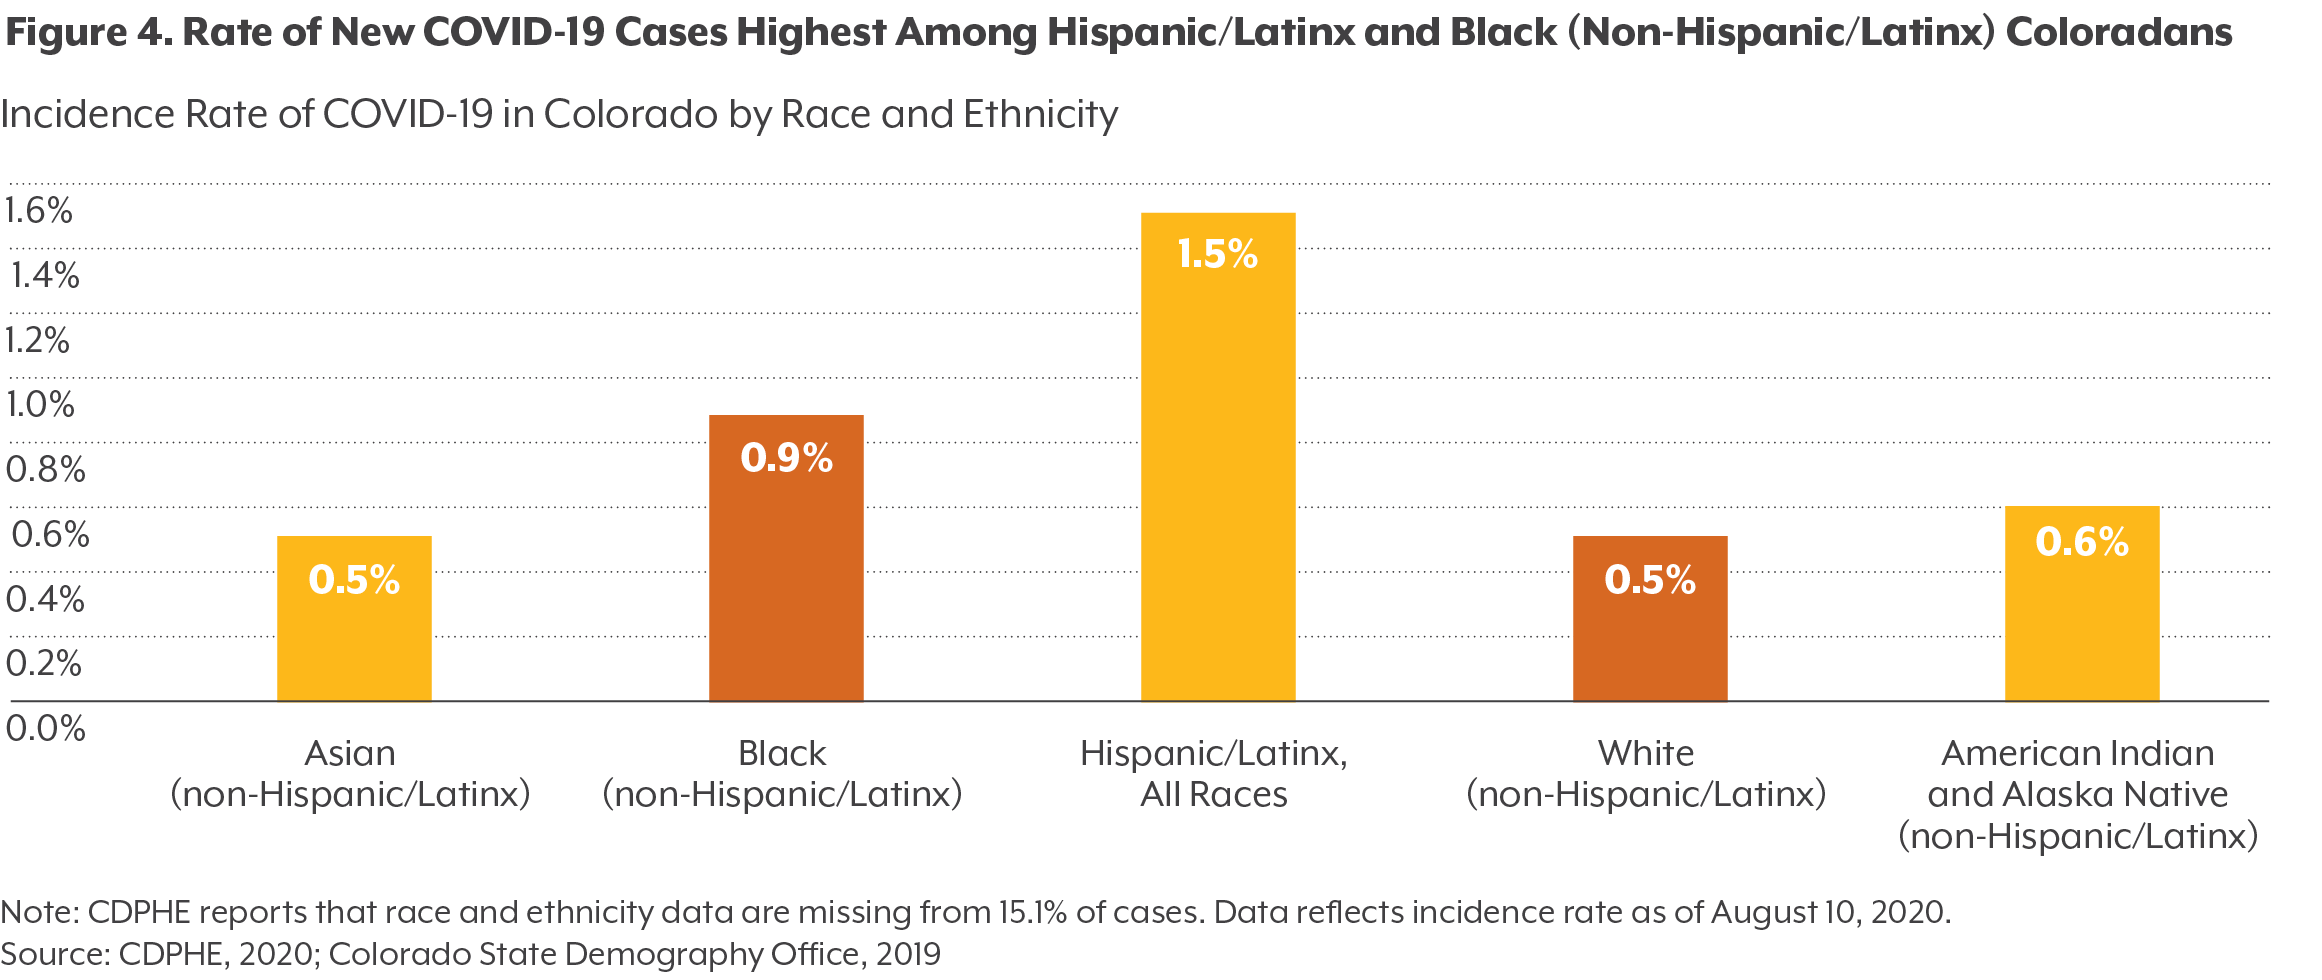 Figure 4. Rate of New COVID-19 Cases Highest Among Hispanic/Latinx and Black Coloradans